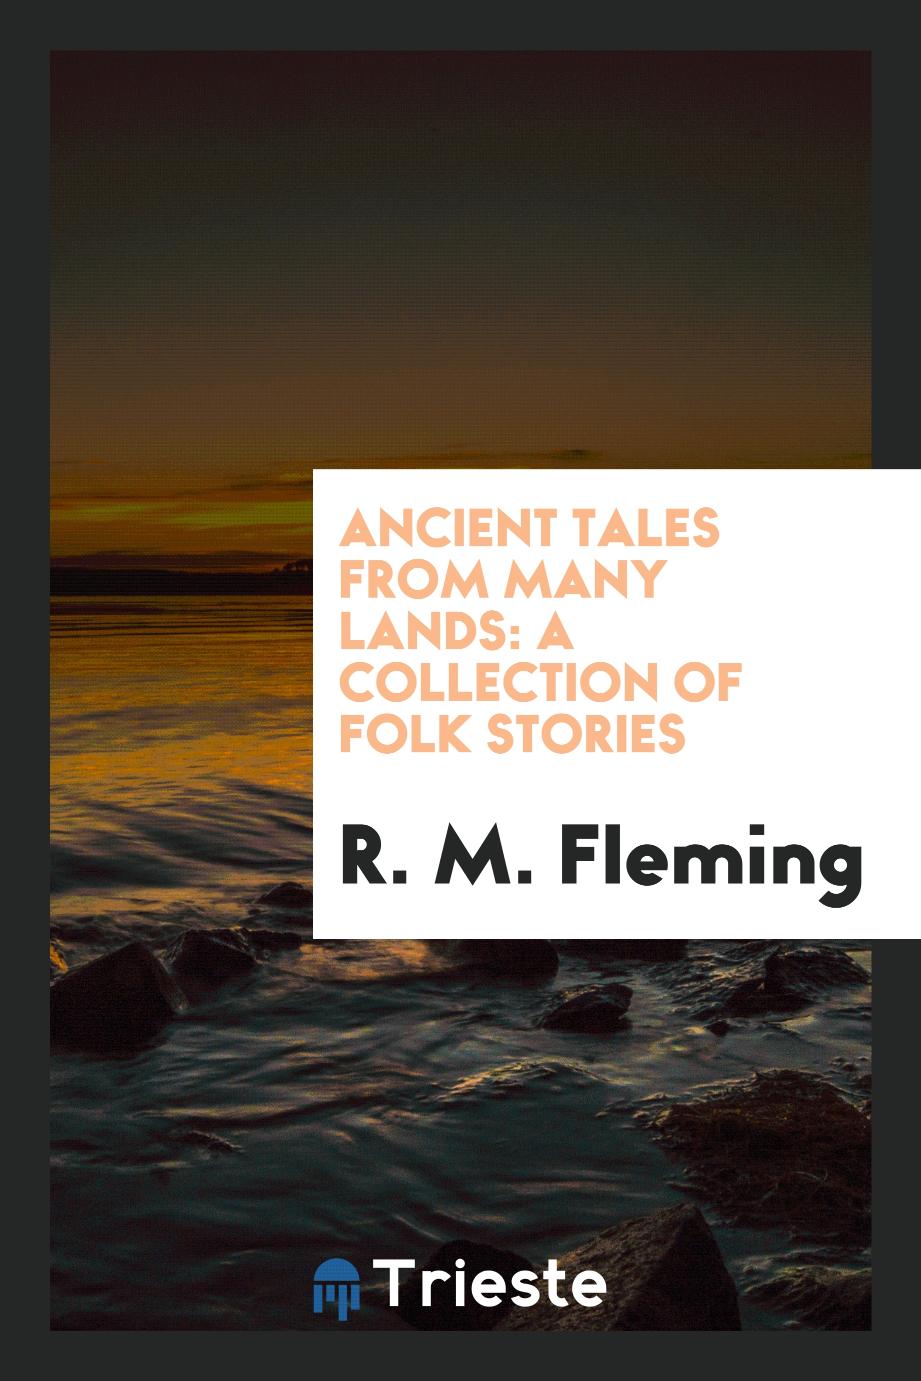 Ancient tales from many lands: a collection of folk stories